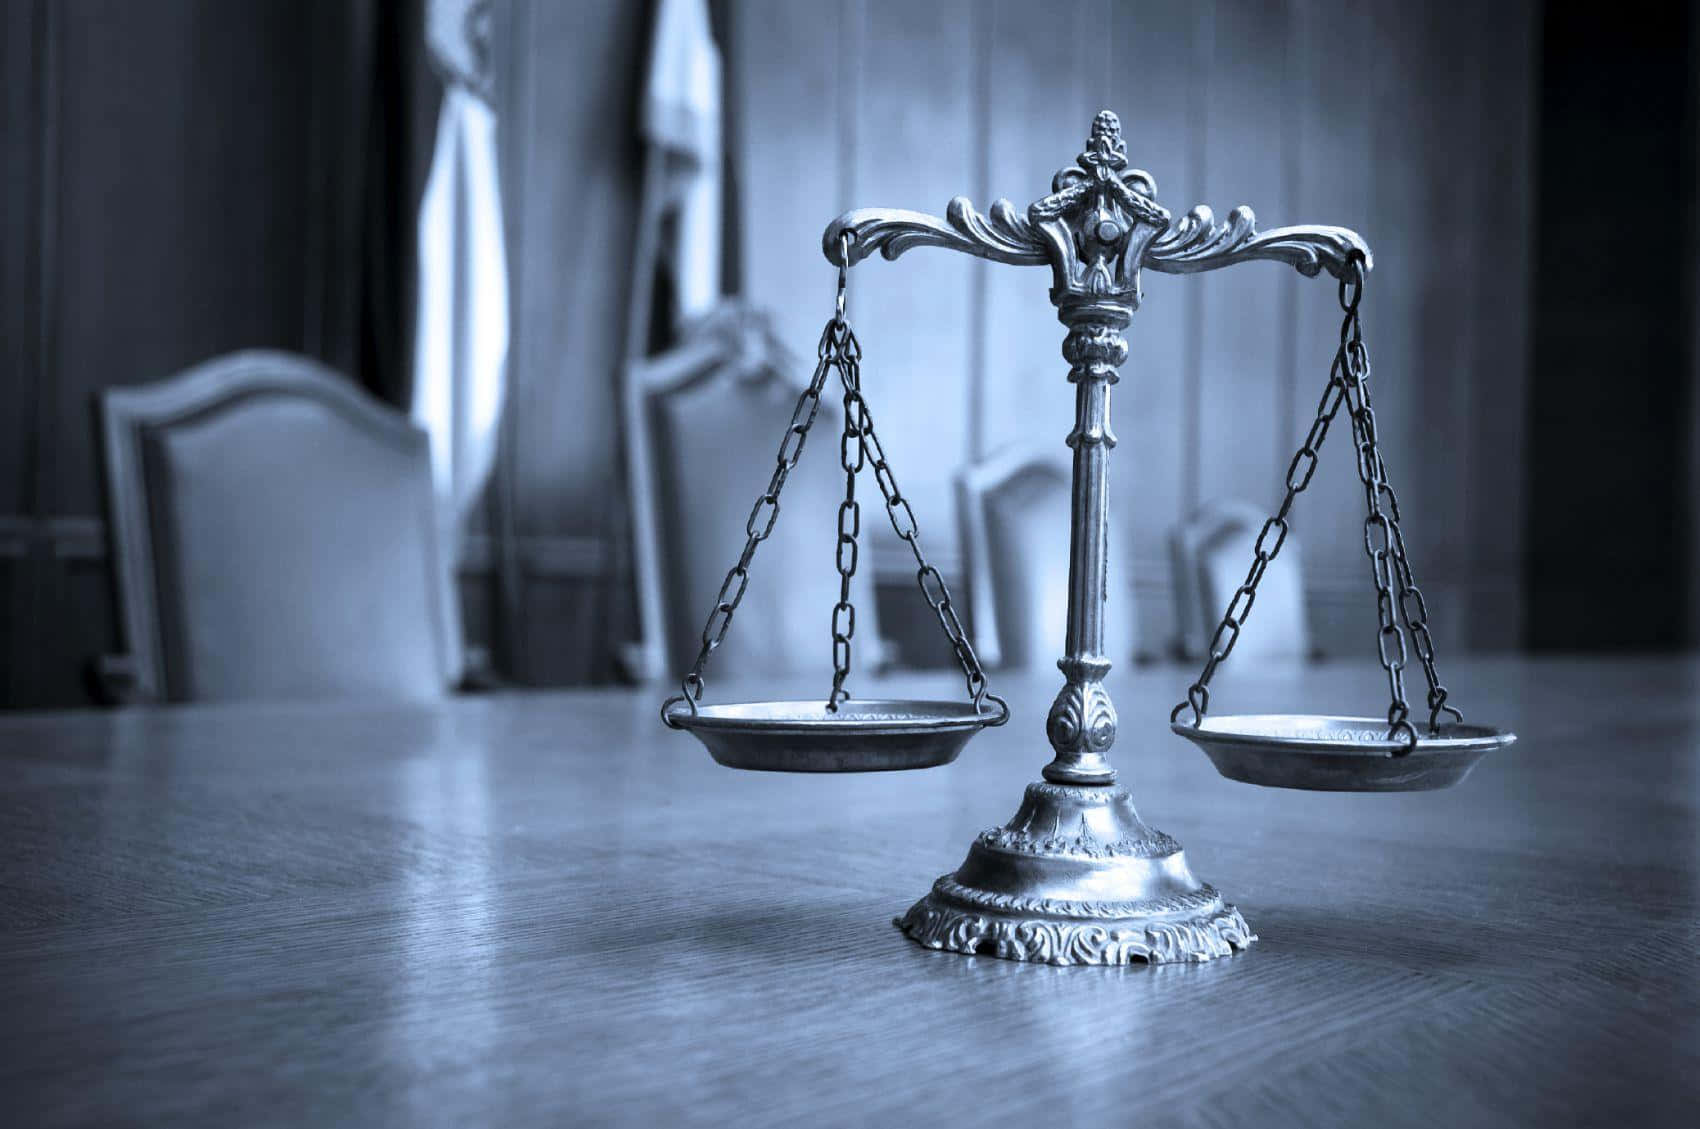 A Scale Of Justice On A Table